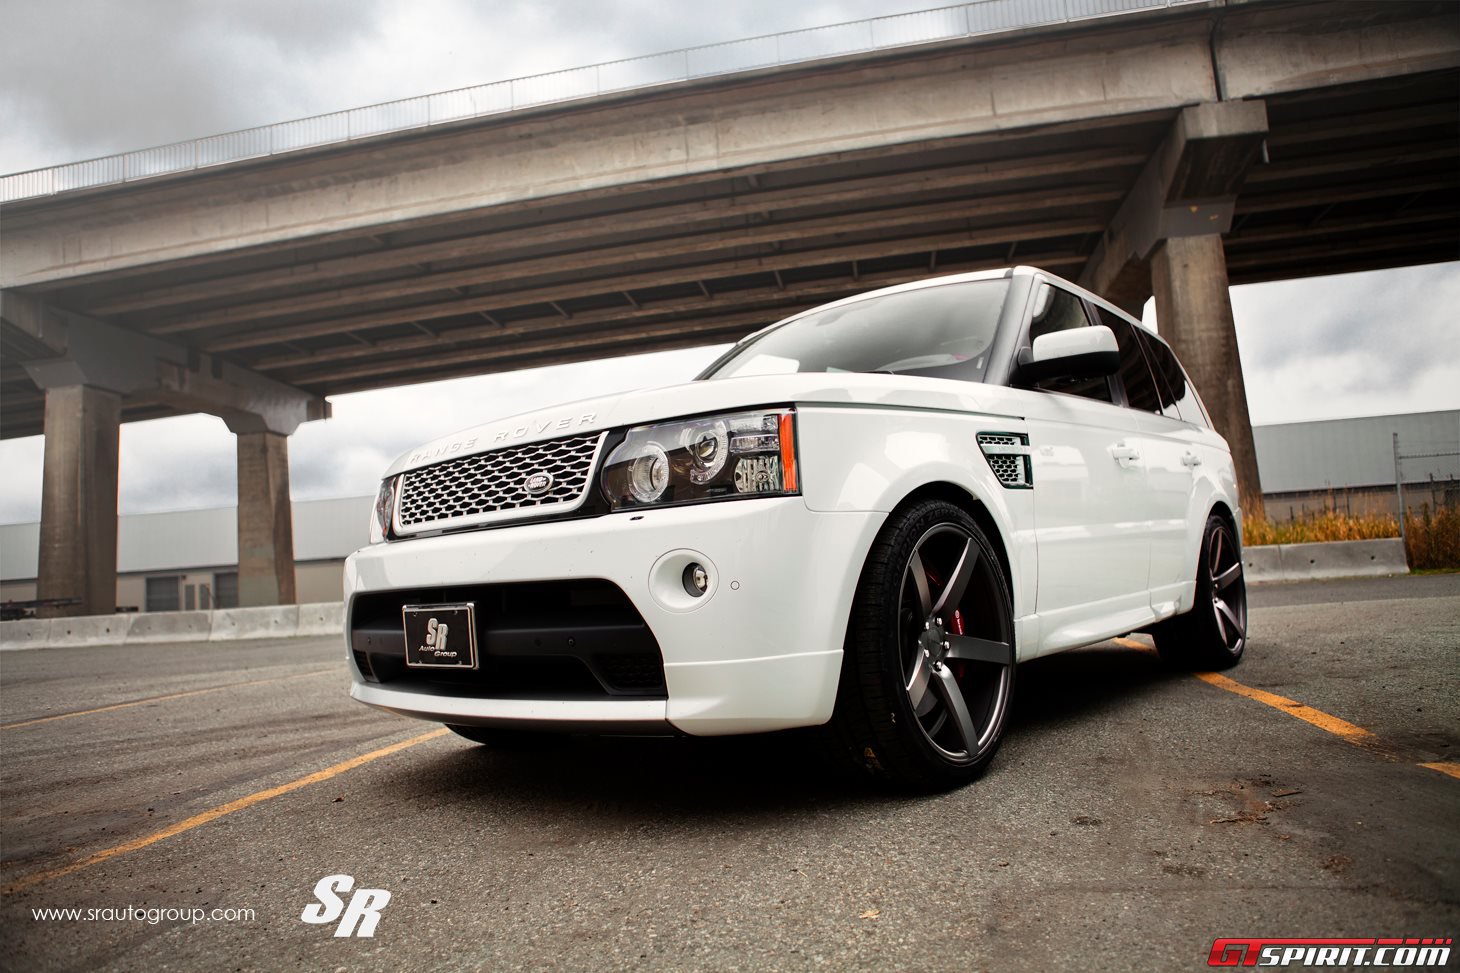 Range Rover Autobiography by SR Auto Group Photo 2